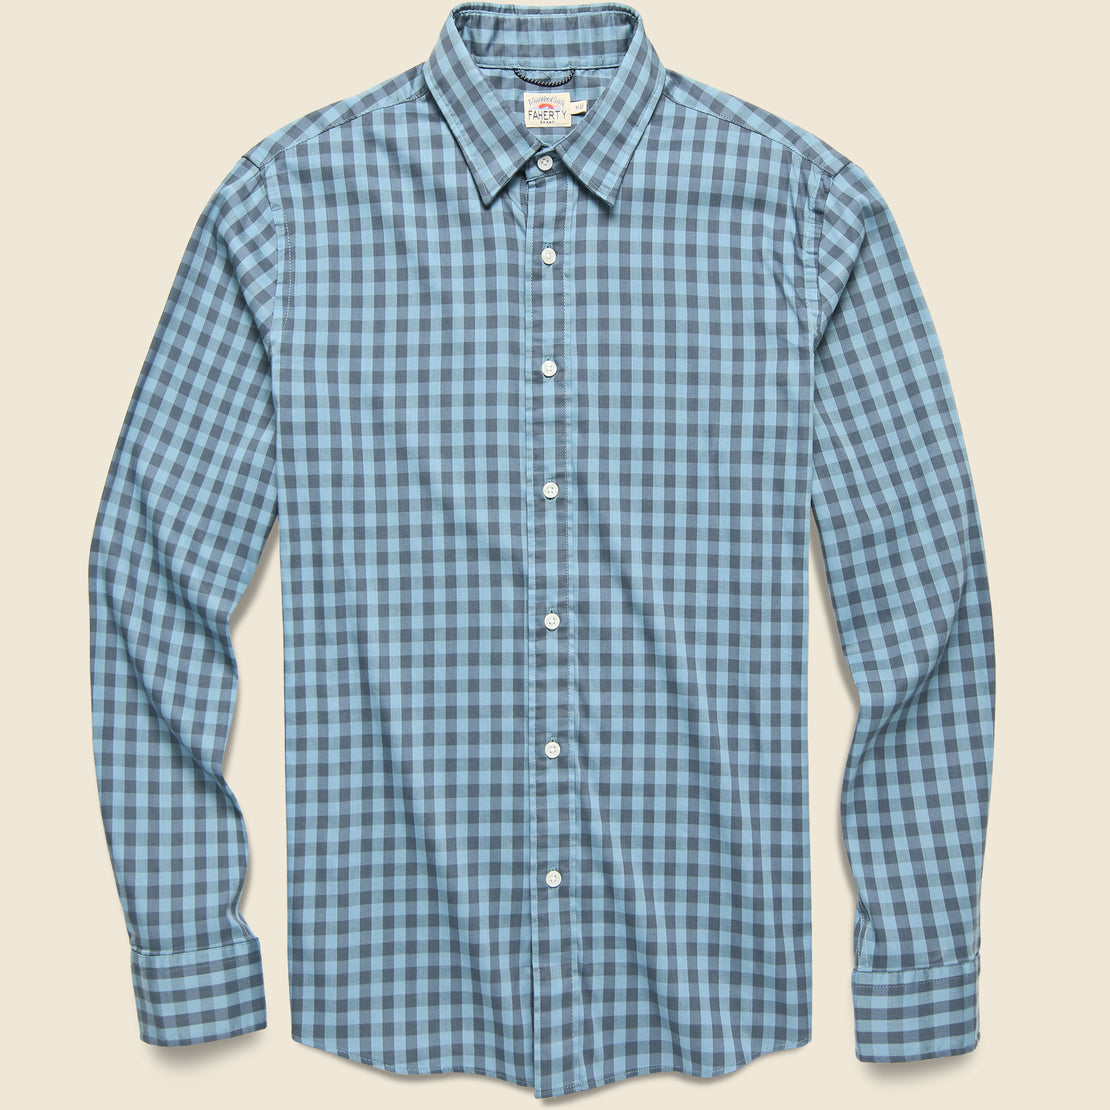 Faherty Movement Shirt - Stormy Shore Gingham